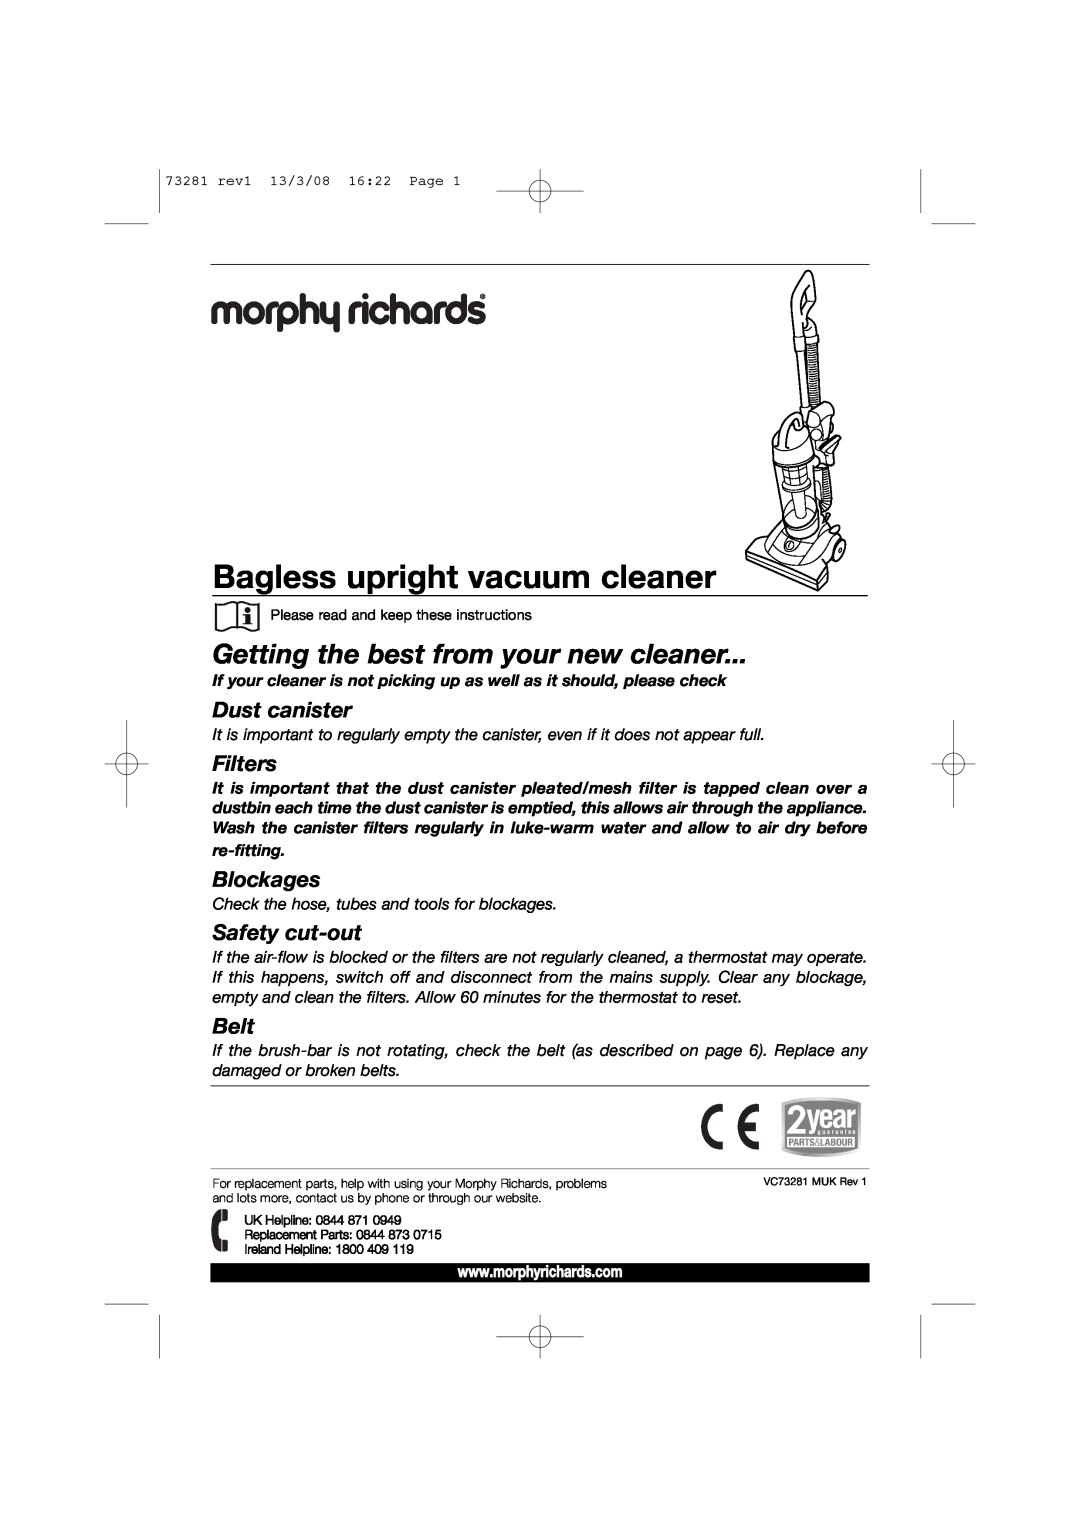 Morphy Richards 73281 manual Bagless upright vacuum cleaner, Getting the best from your new cleaner, Dust canister, Belt 